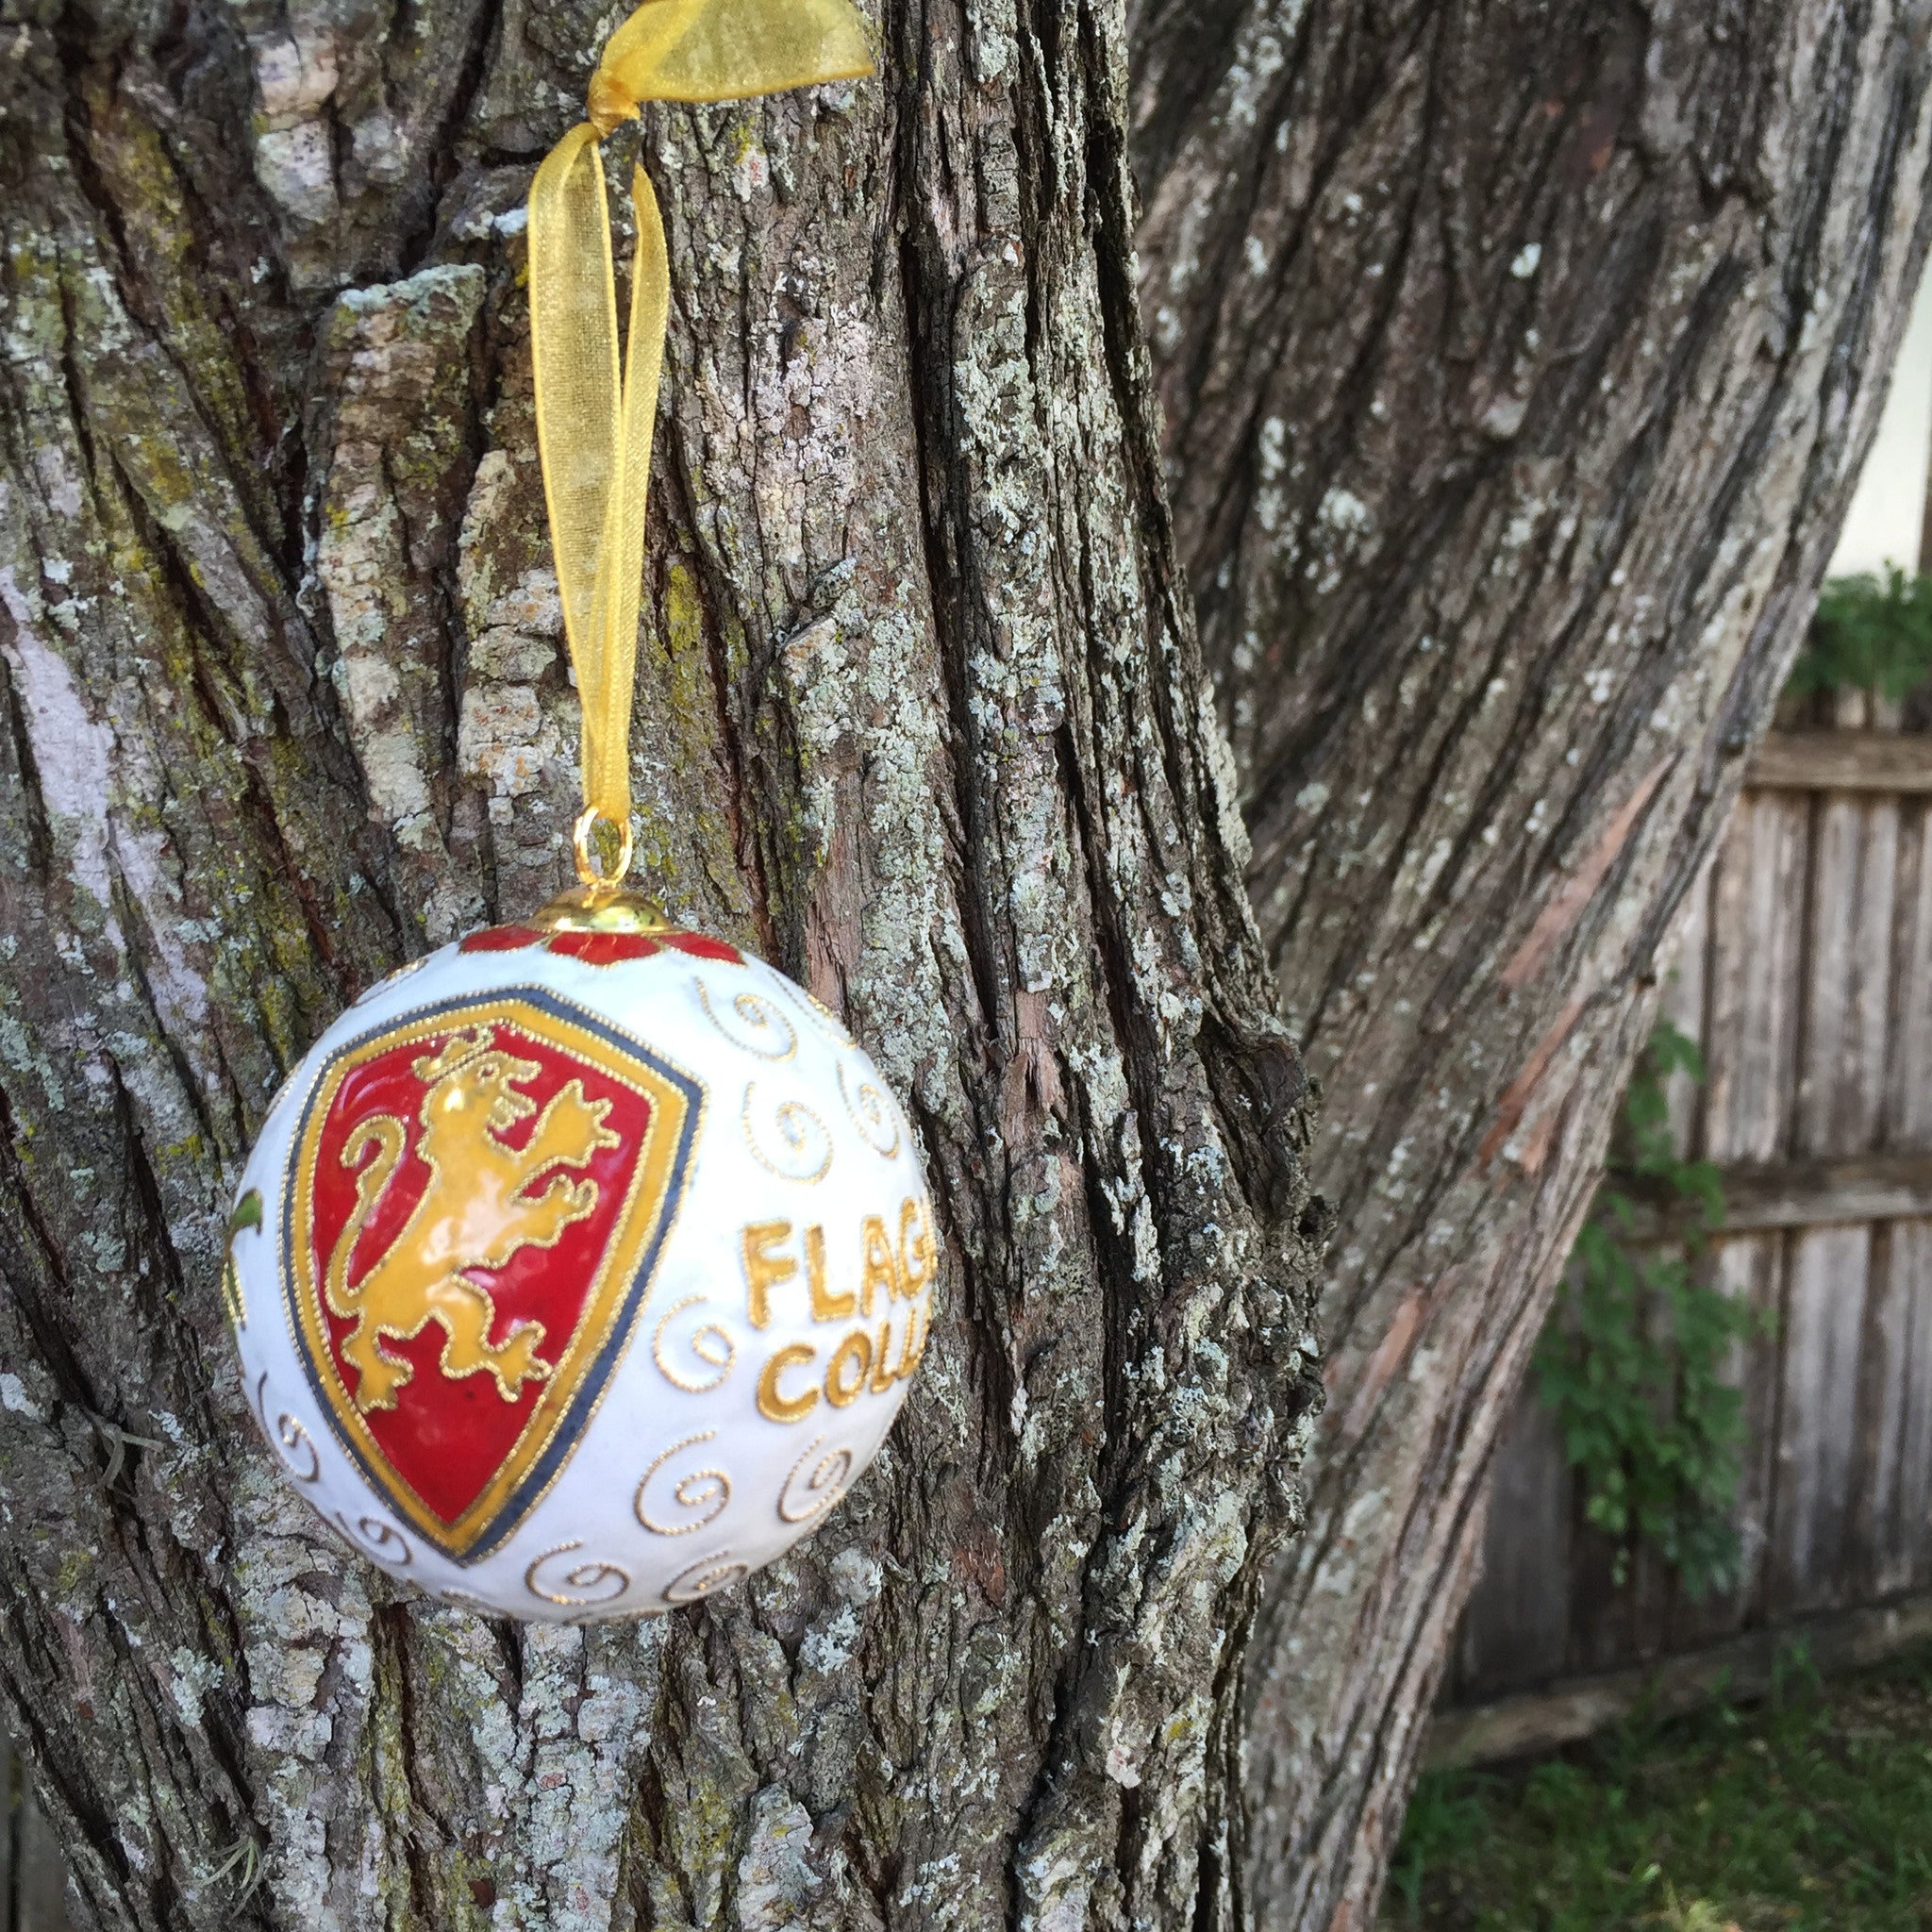 red, white and yellow Flagler college round cloisonne ornament 